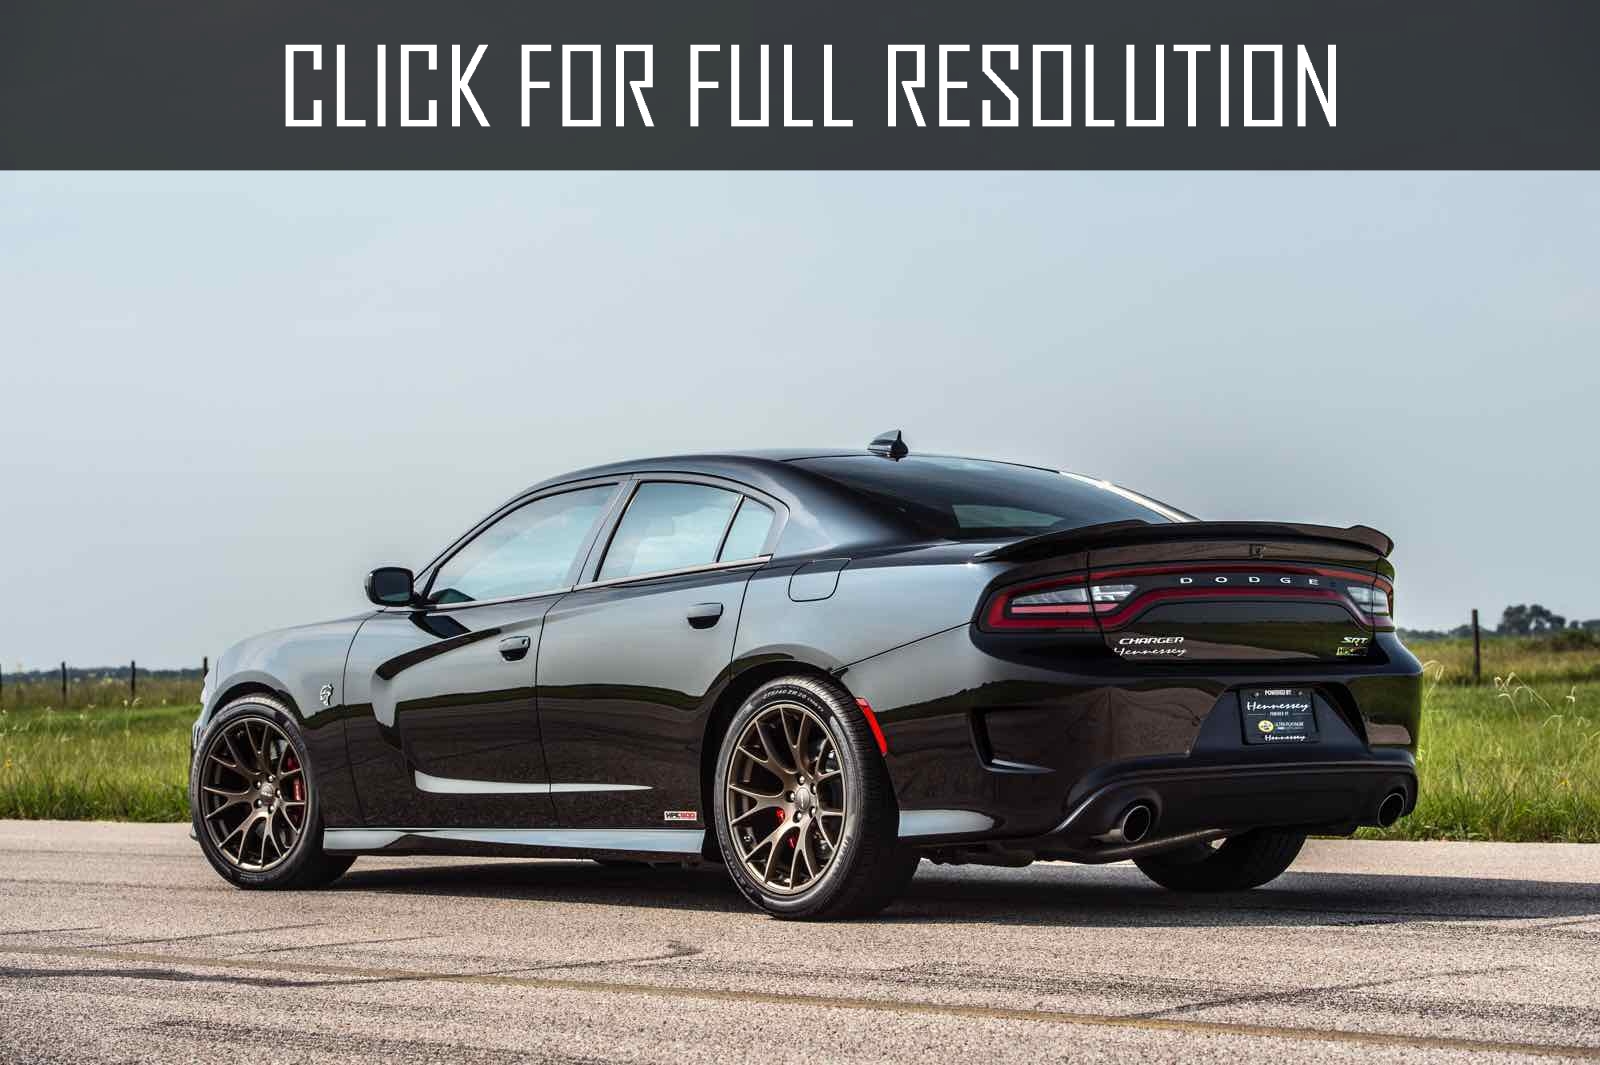 2017 Dodge Charger Hellcat